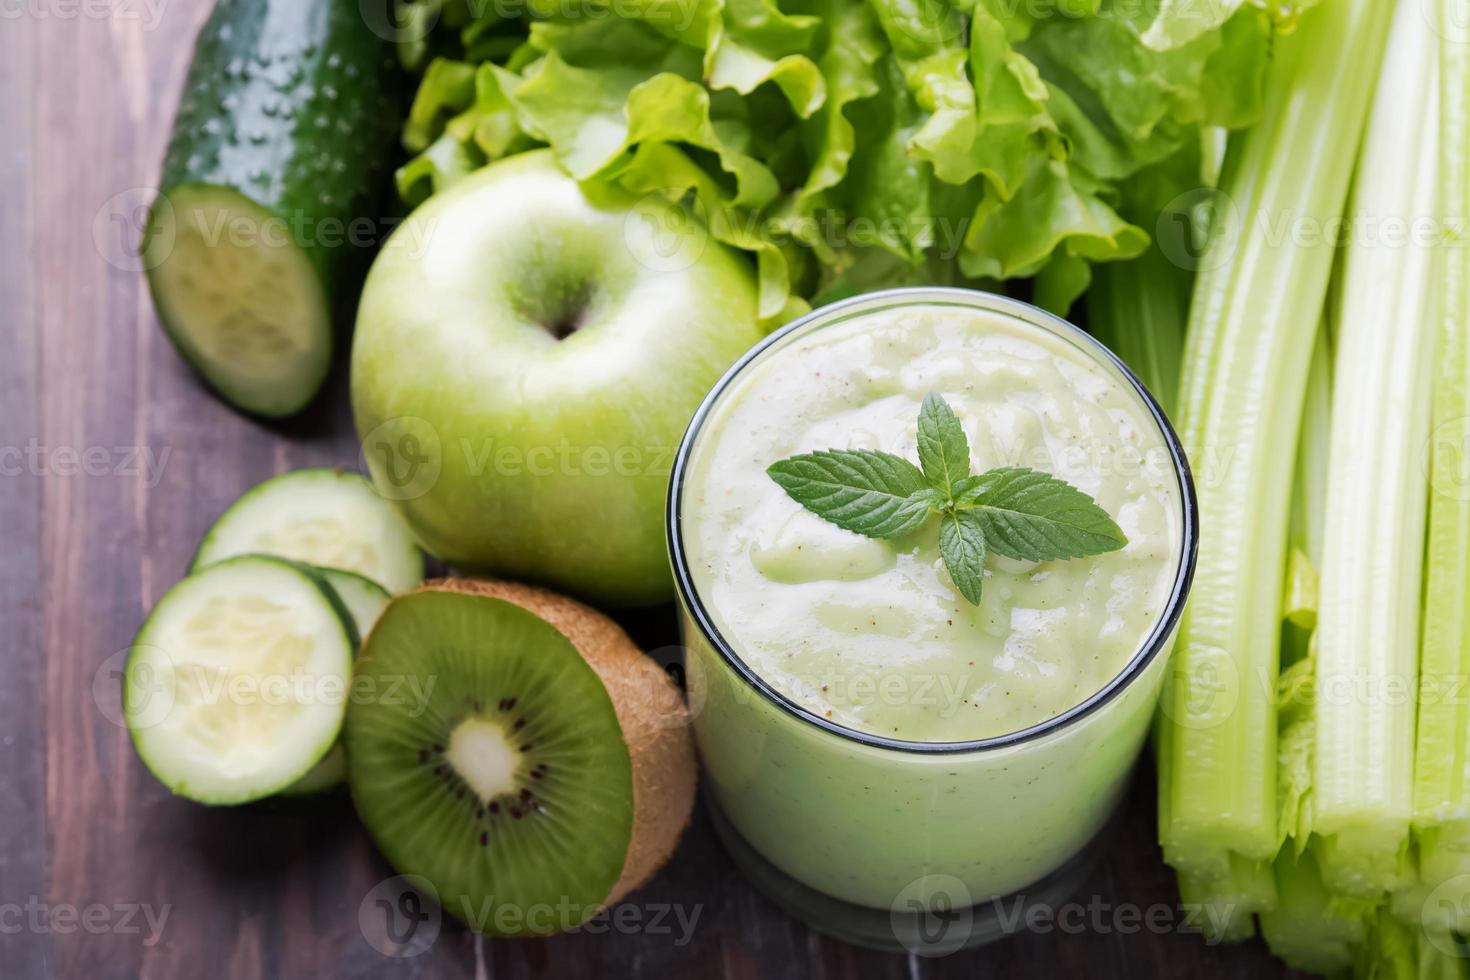 Green smoothie, vegetables and fruits photo